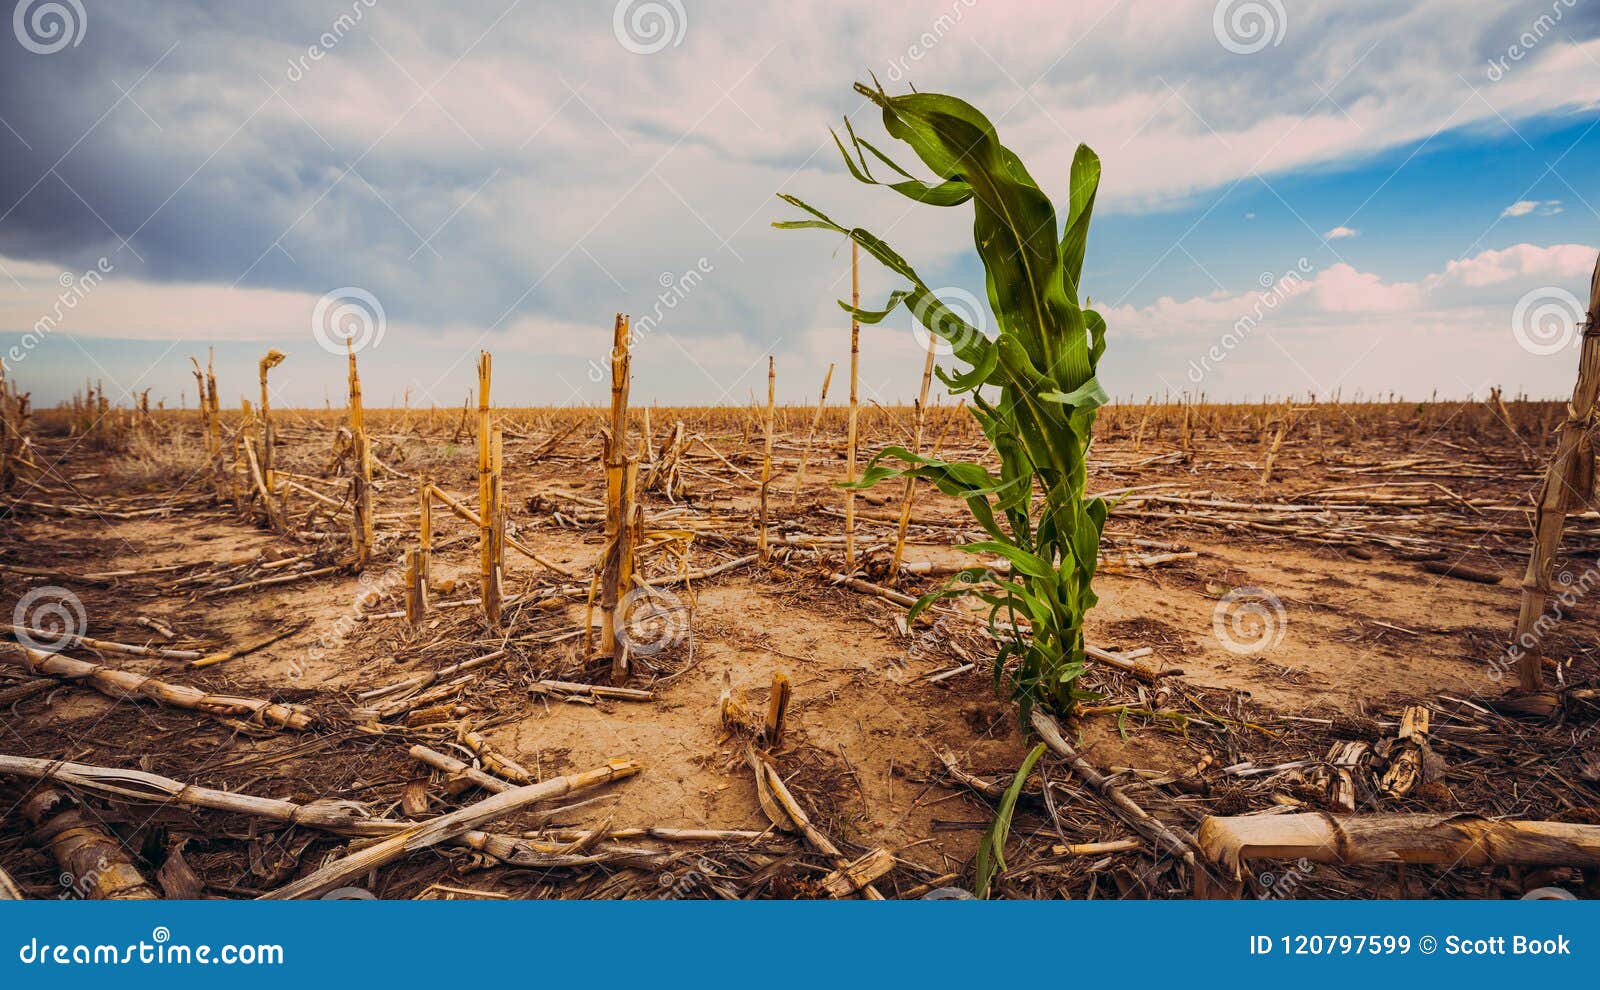 extreme drougt in a cornfield